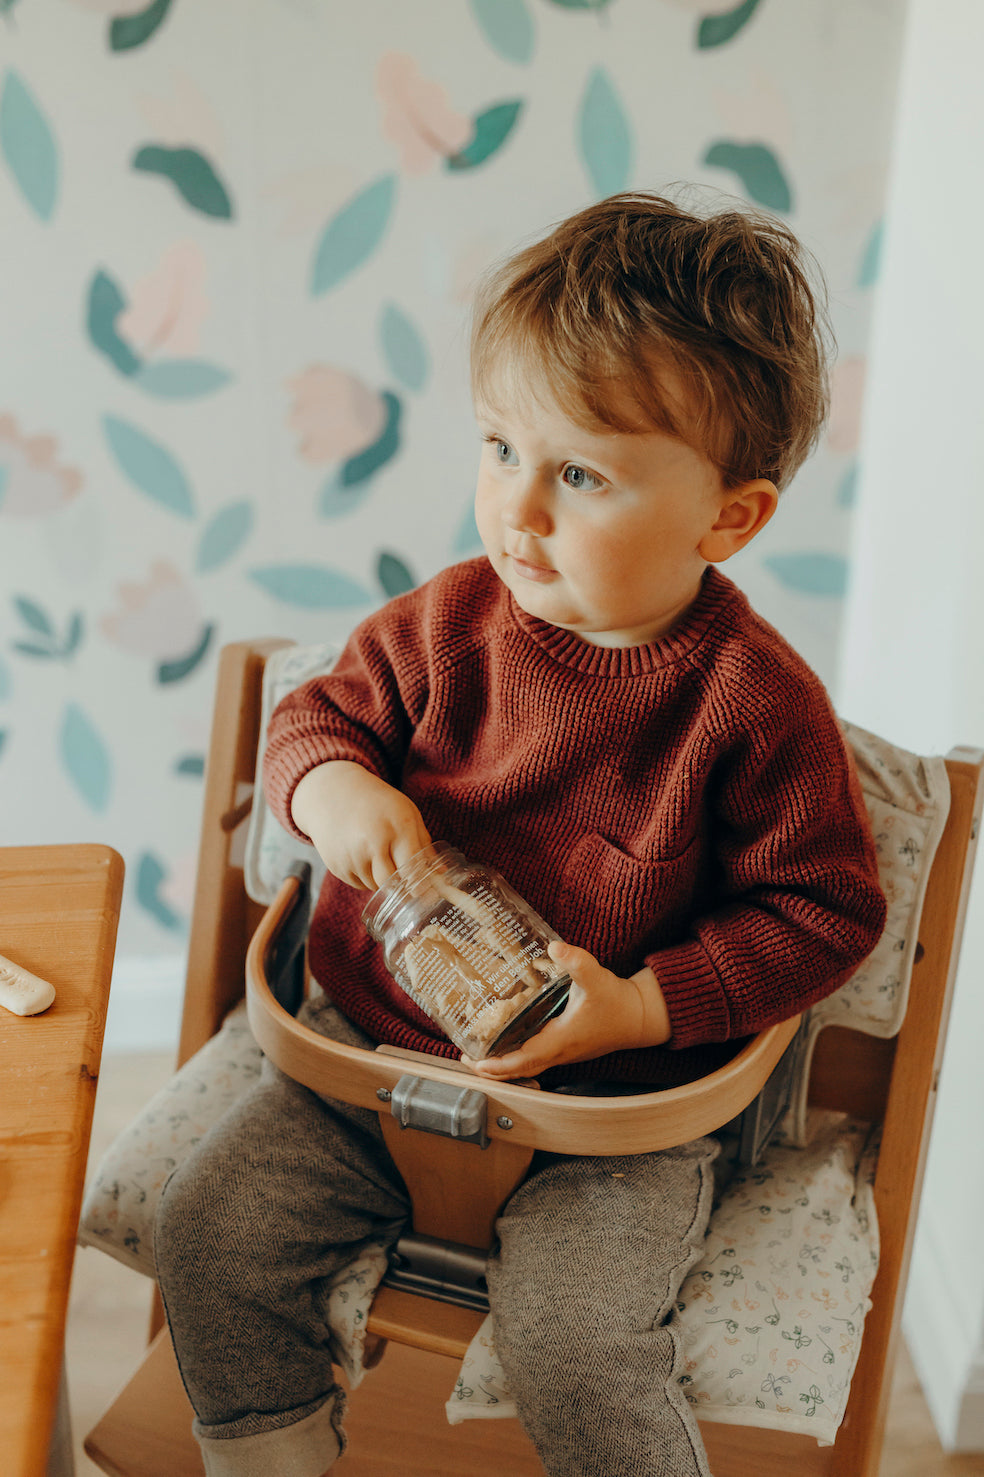 Syt - Wooden High Chair